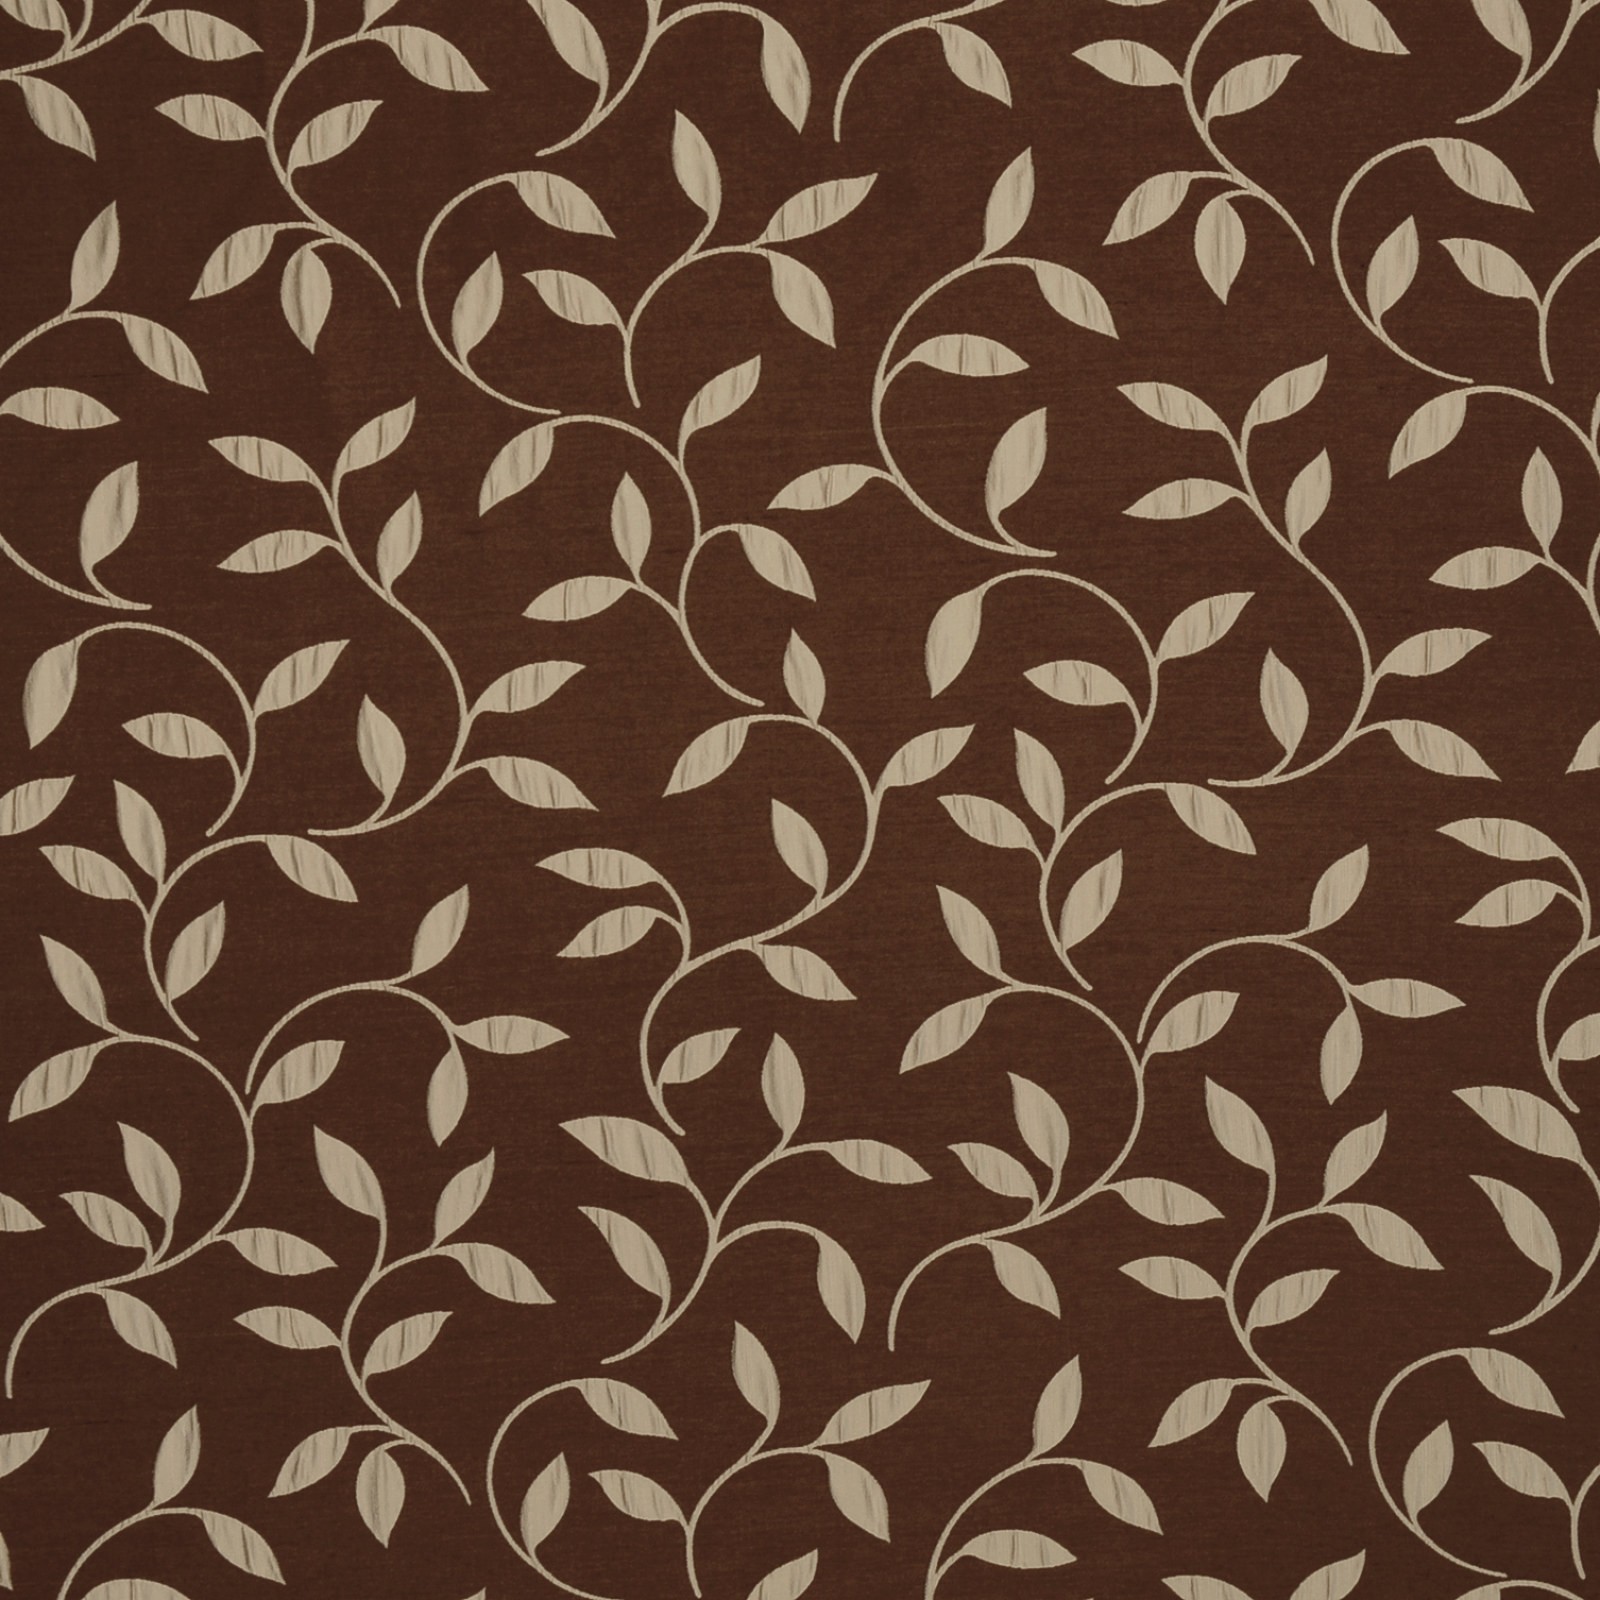 DRAPERY UPHOLSTERY FABRIC JACQUARD LEAVES DESIGN ANTIQUE CHOCOLATE BY THE YARD 